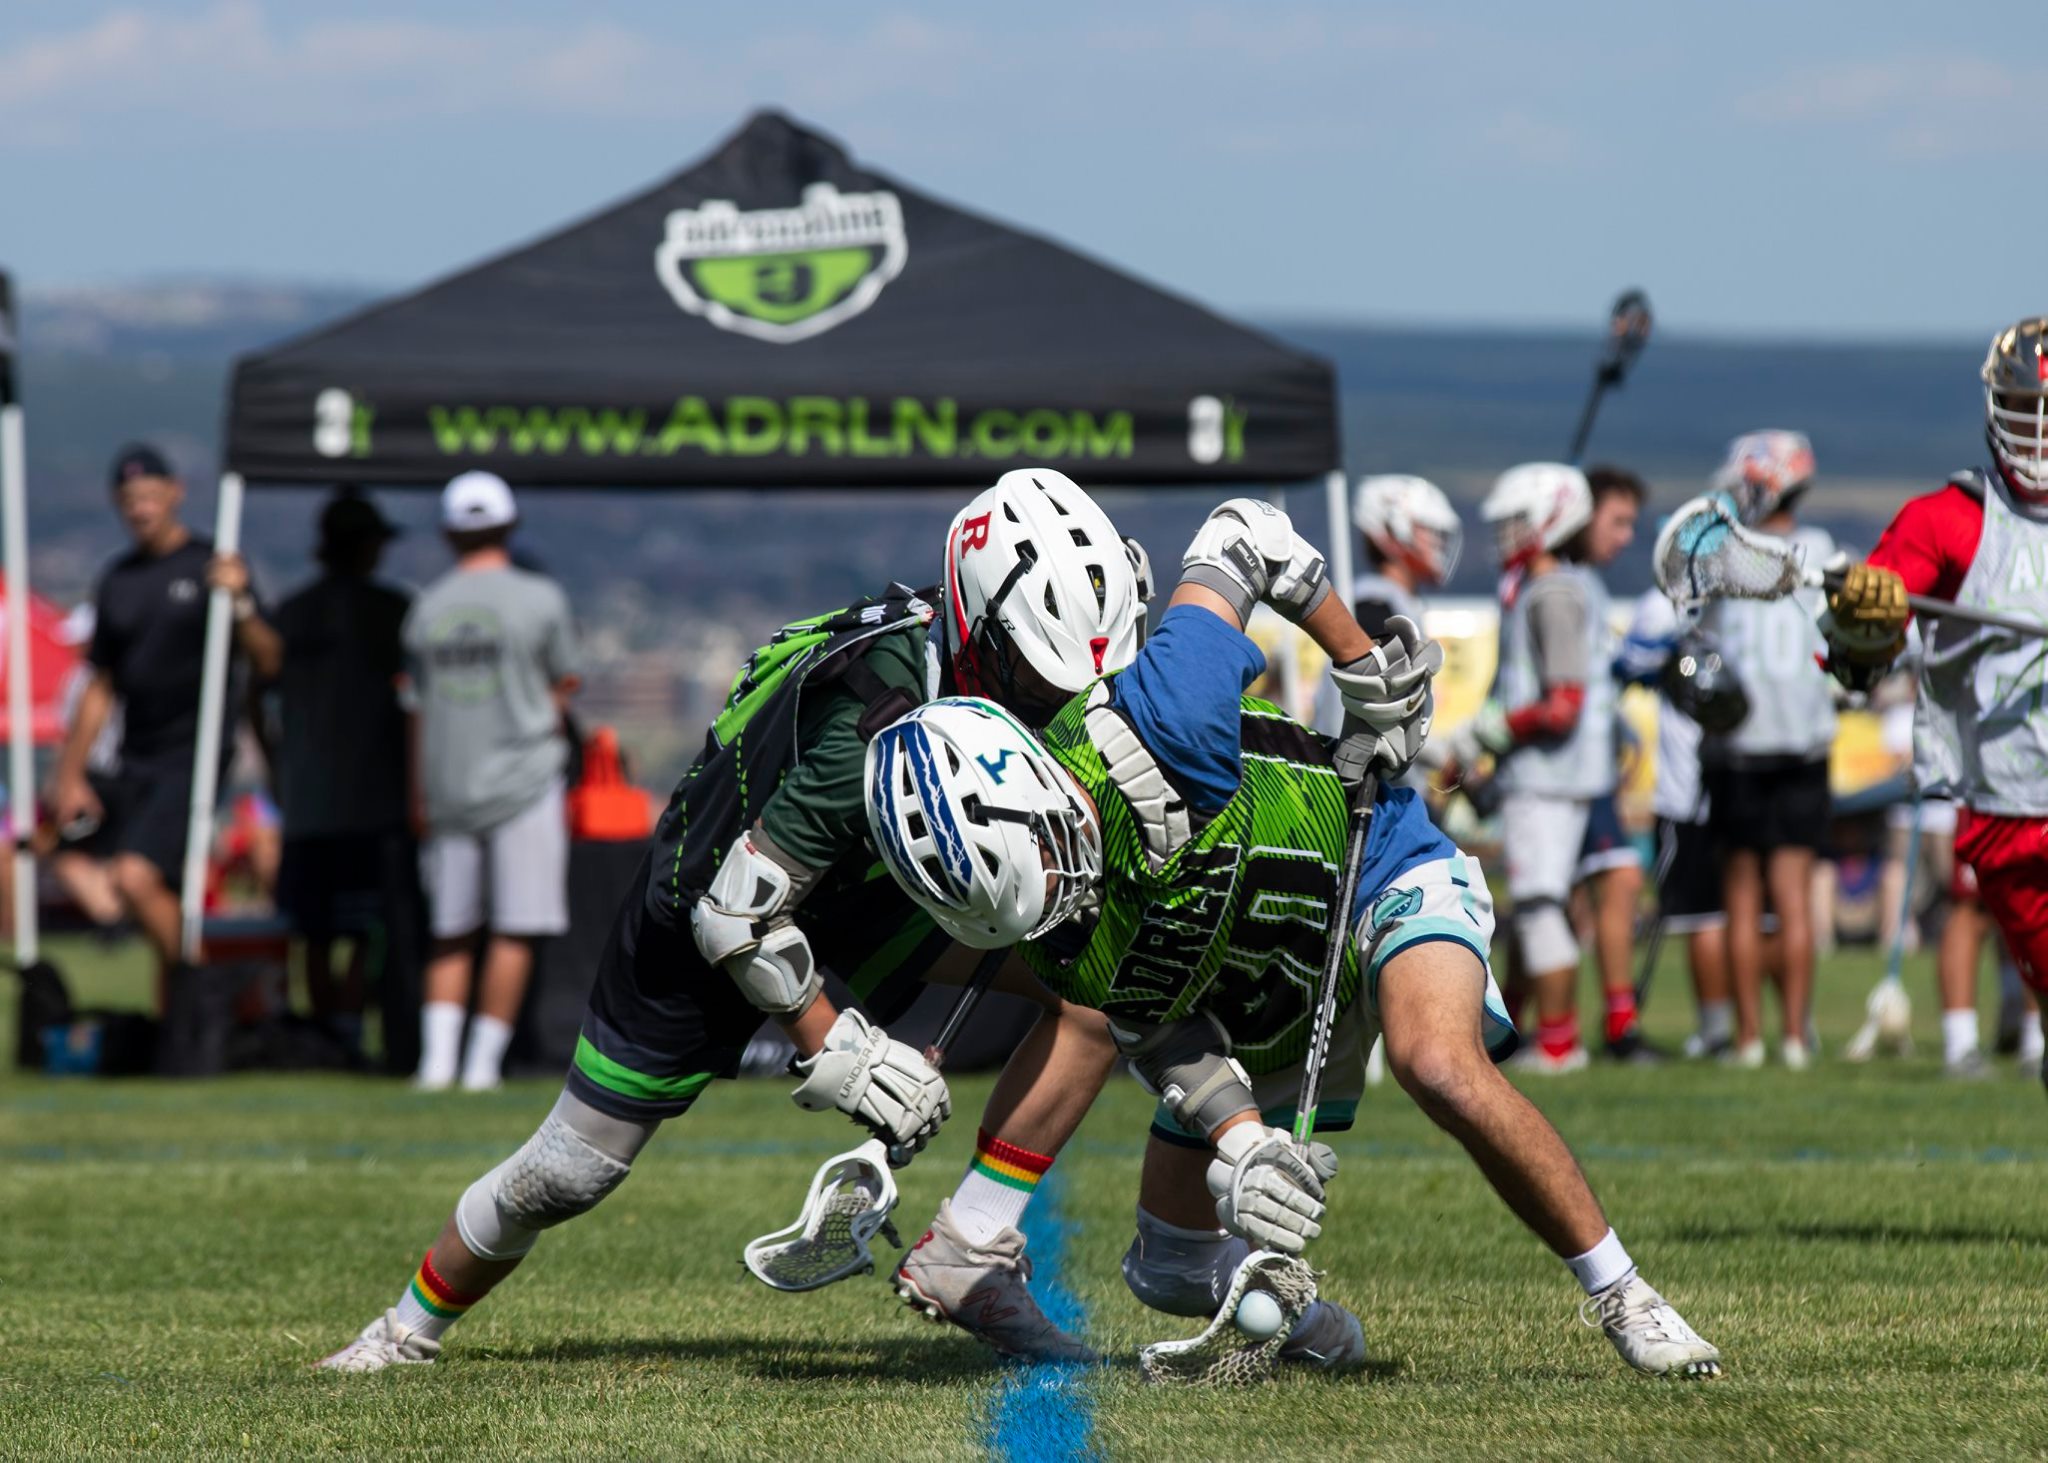 Best Display Of Western Talent At Western Shootout Adrenaline